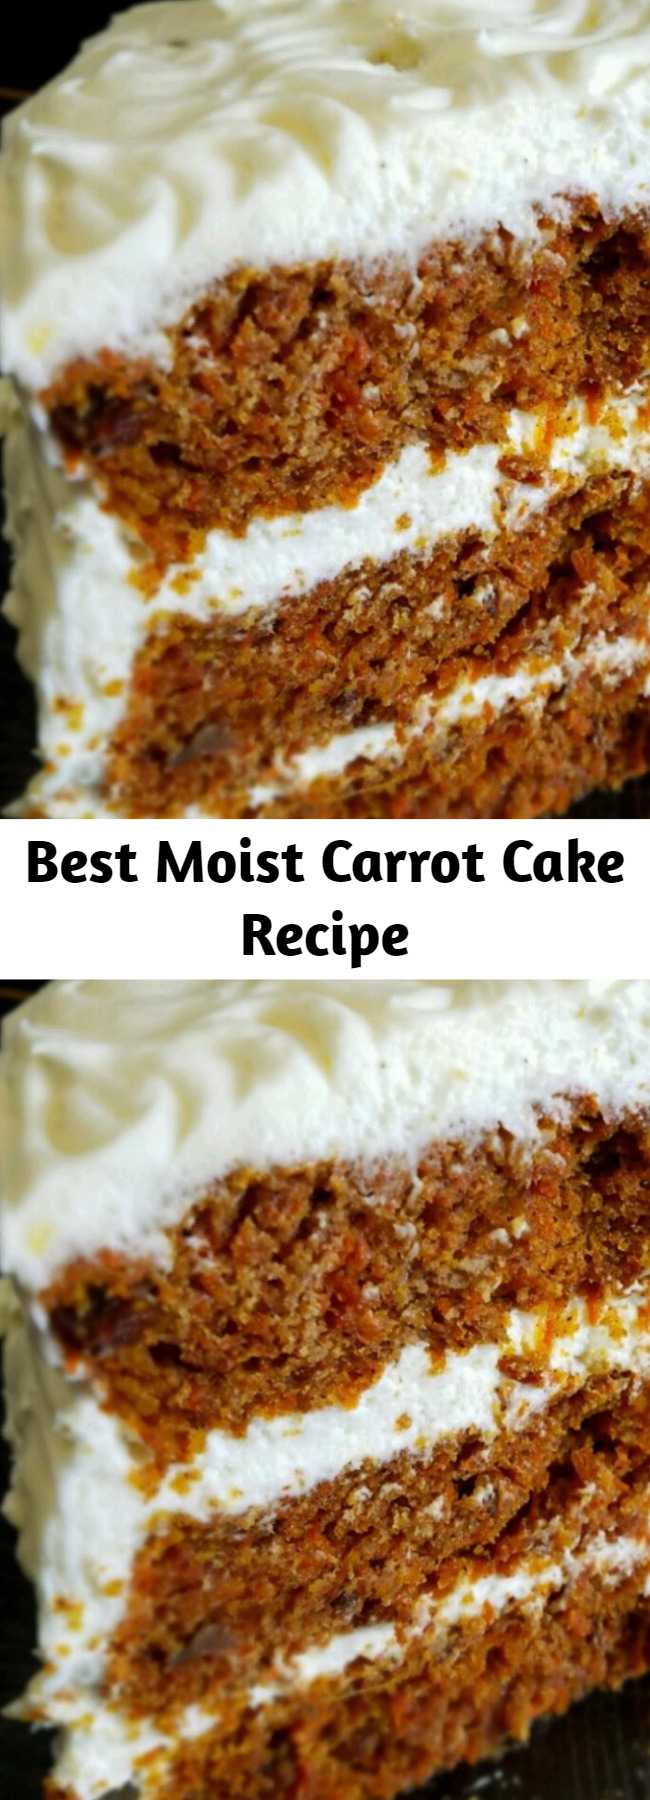 Best Moist Carrot Cake Recipe - A moist and flavorful recipe that makes a large quantity of cake. I have been hounded to make this cake time and time again.